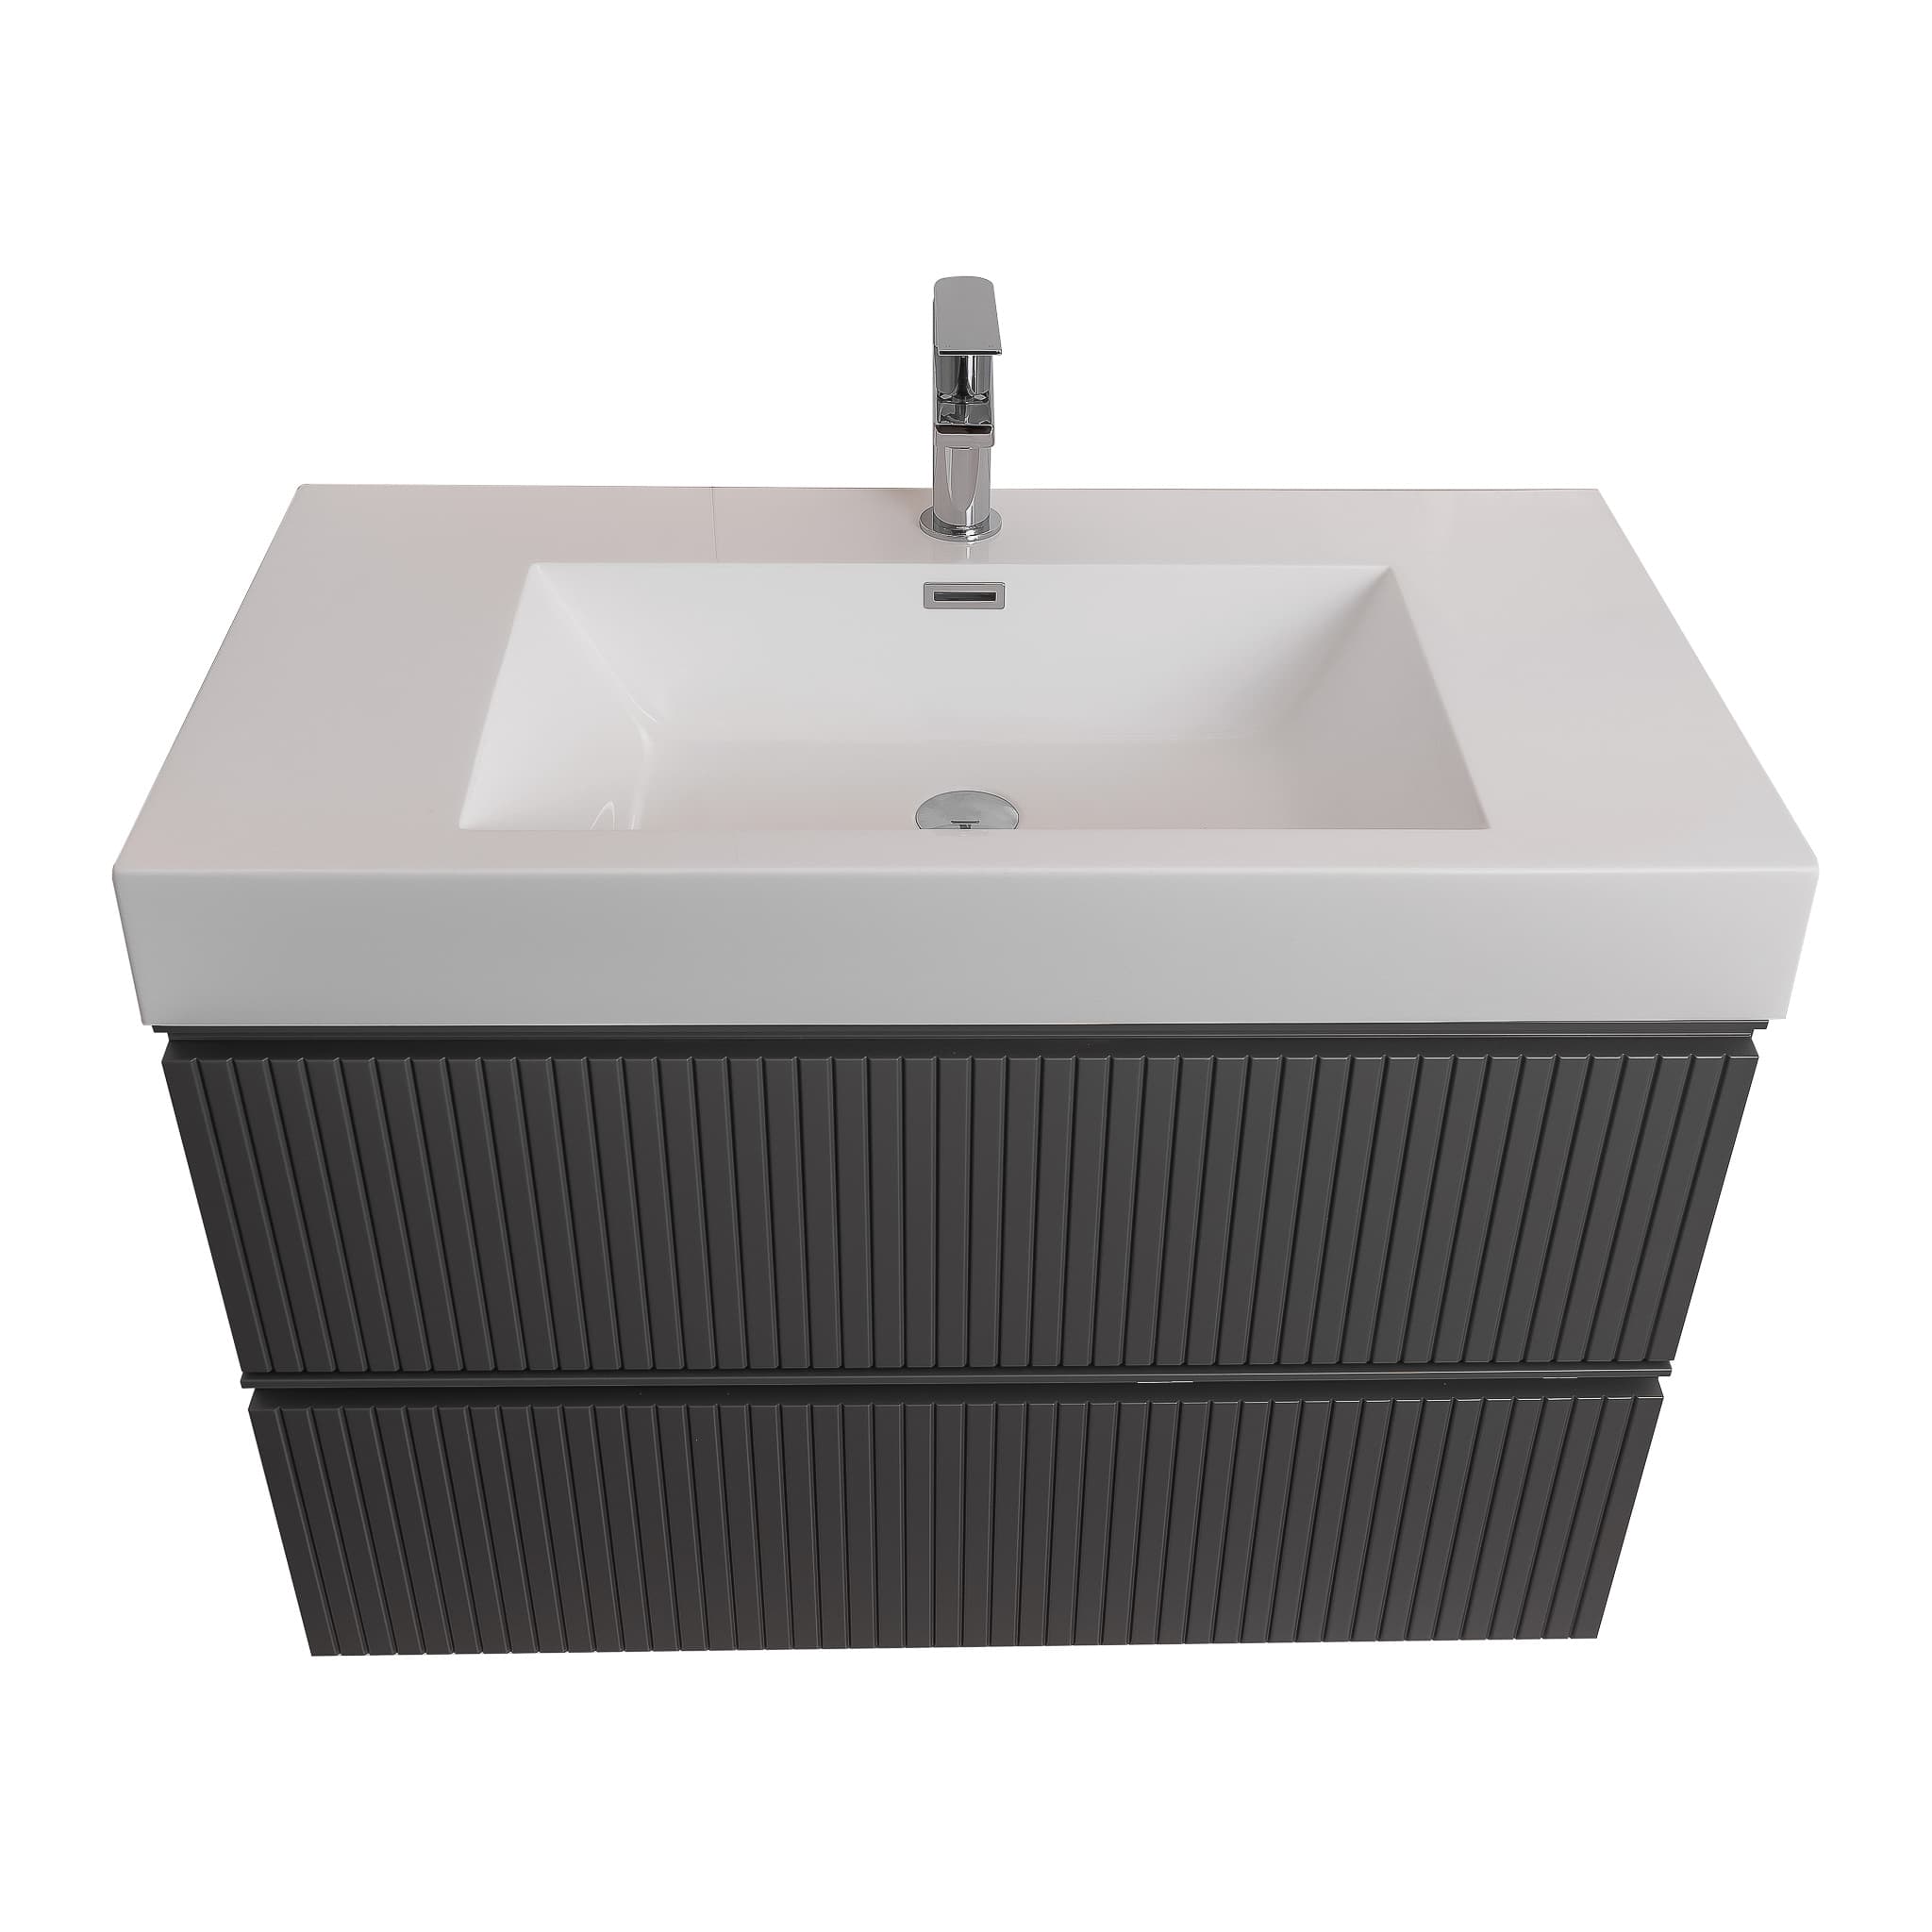 Ares 35.5 Matte Grey Cabinet, Square Cultured Marble Sink, Wall Mounted Modern Vanity Set